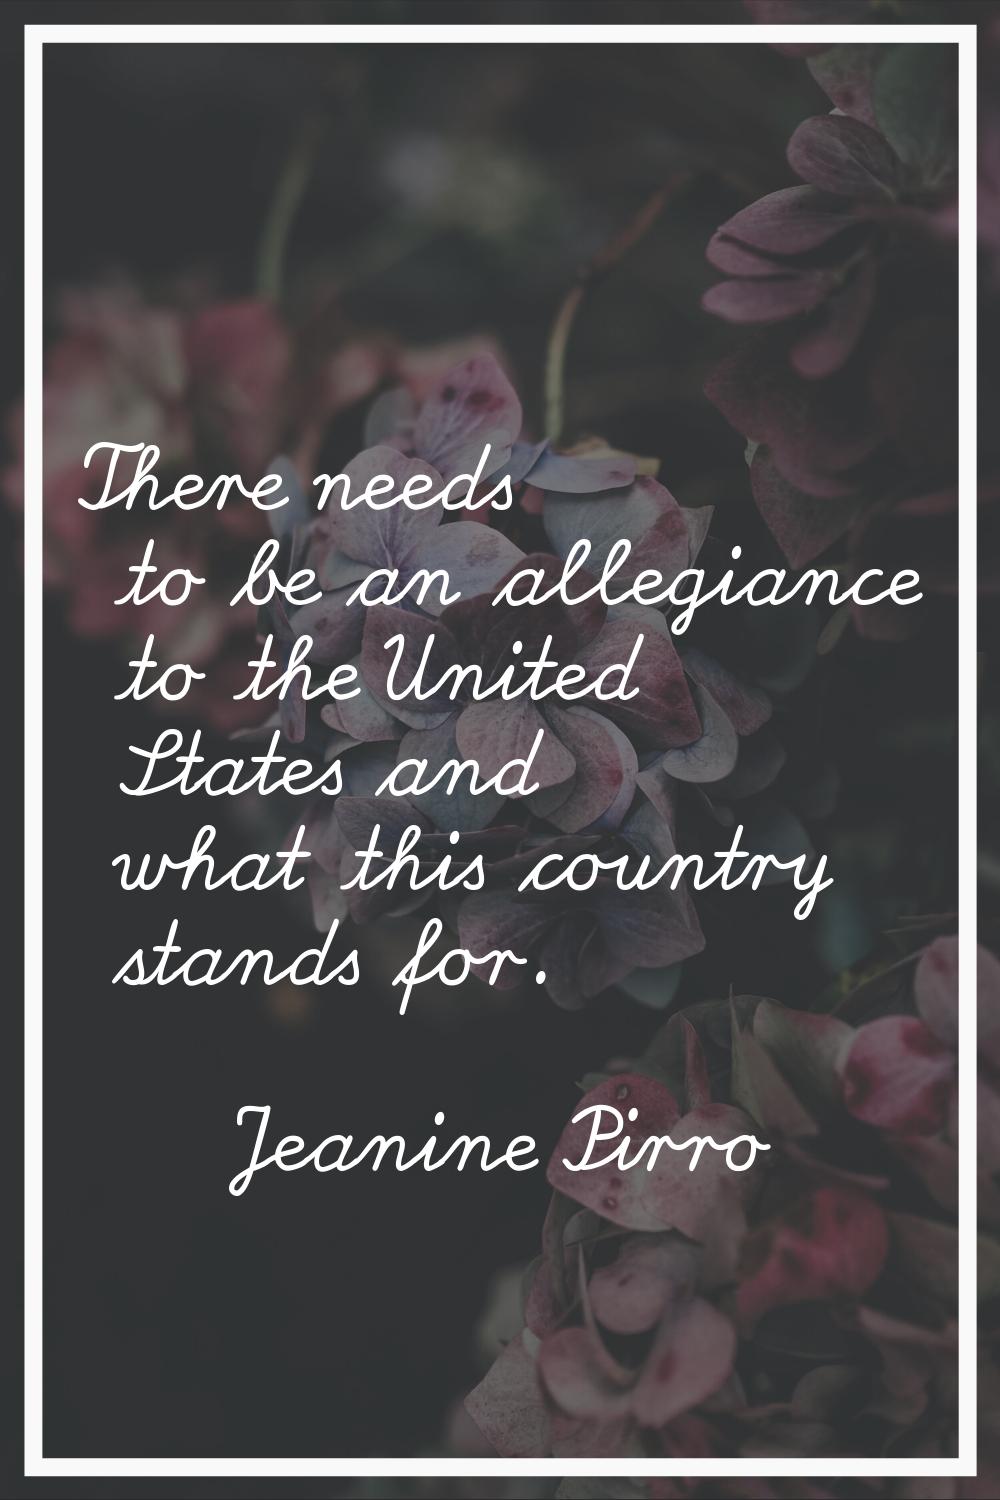 There needs to be an allegiance to the United States and what this country stands for.